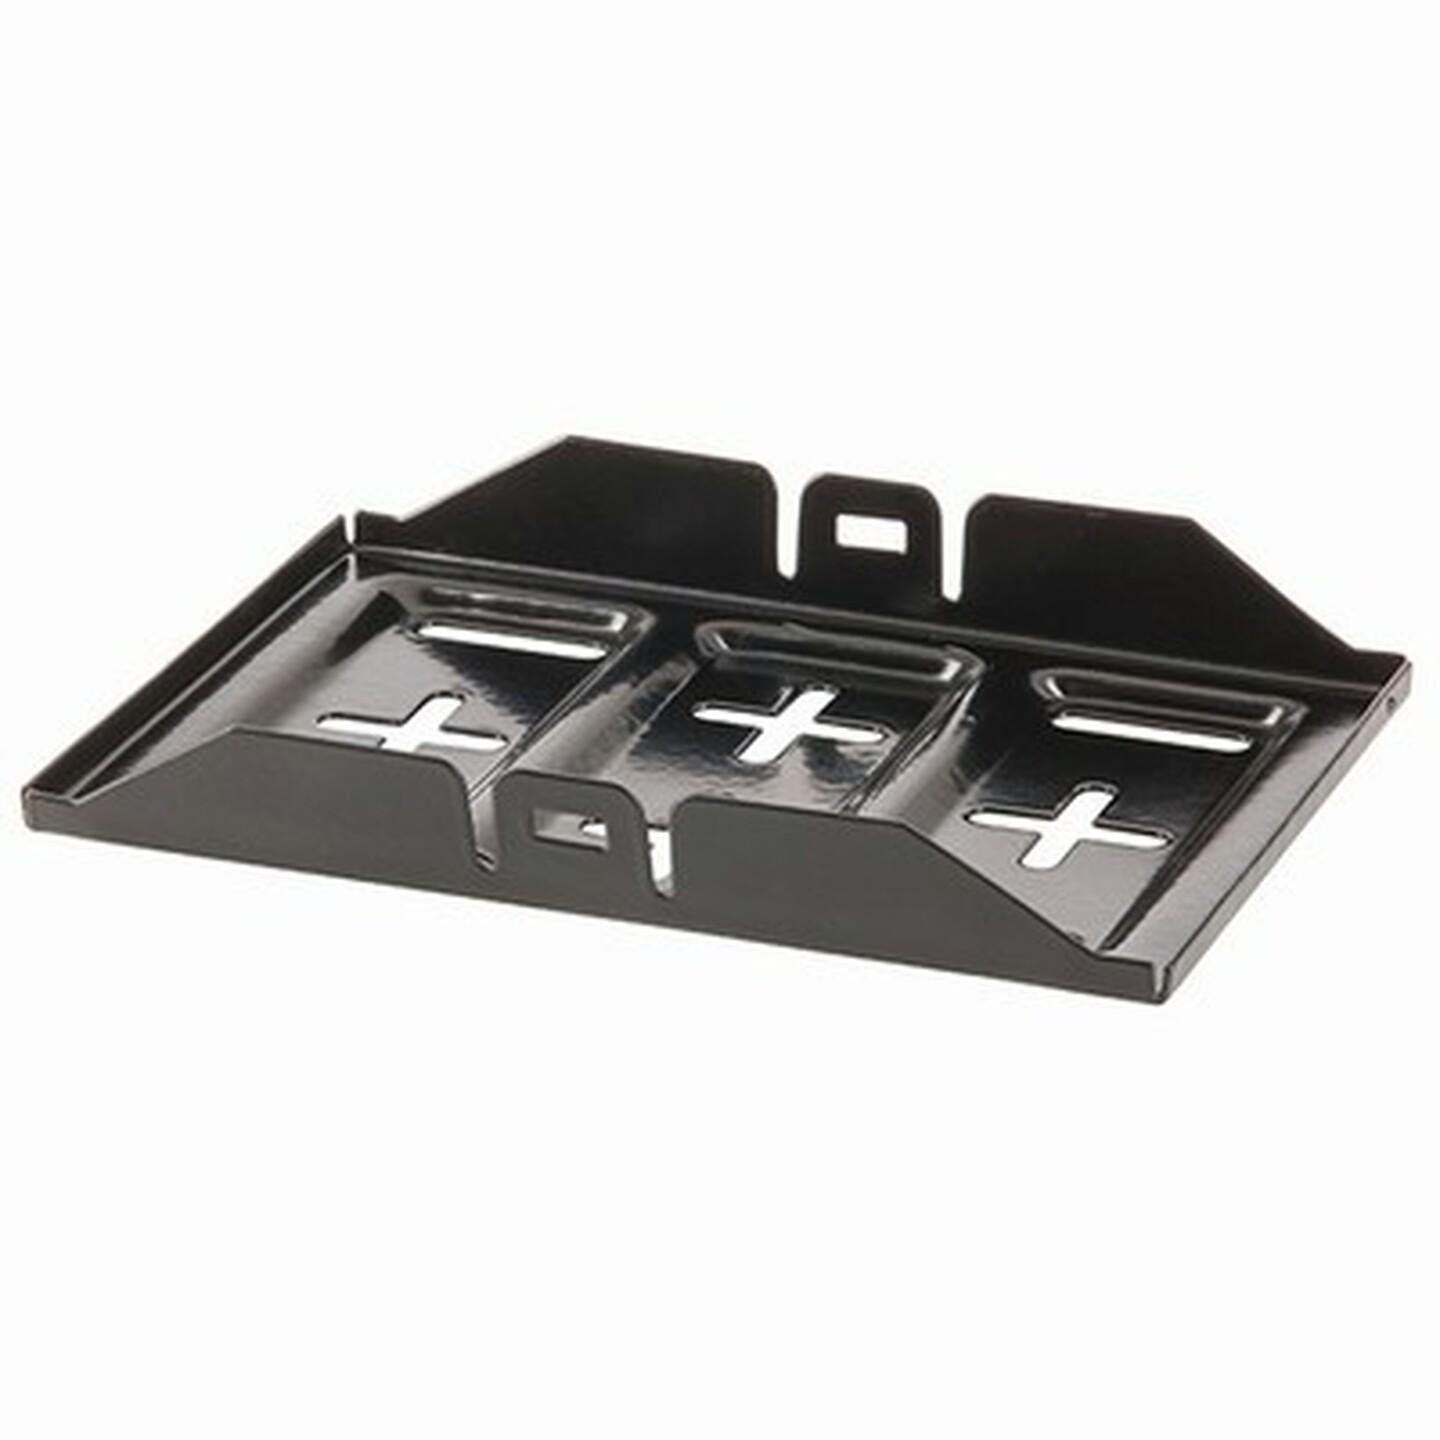 Battery Securing Tray - Large